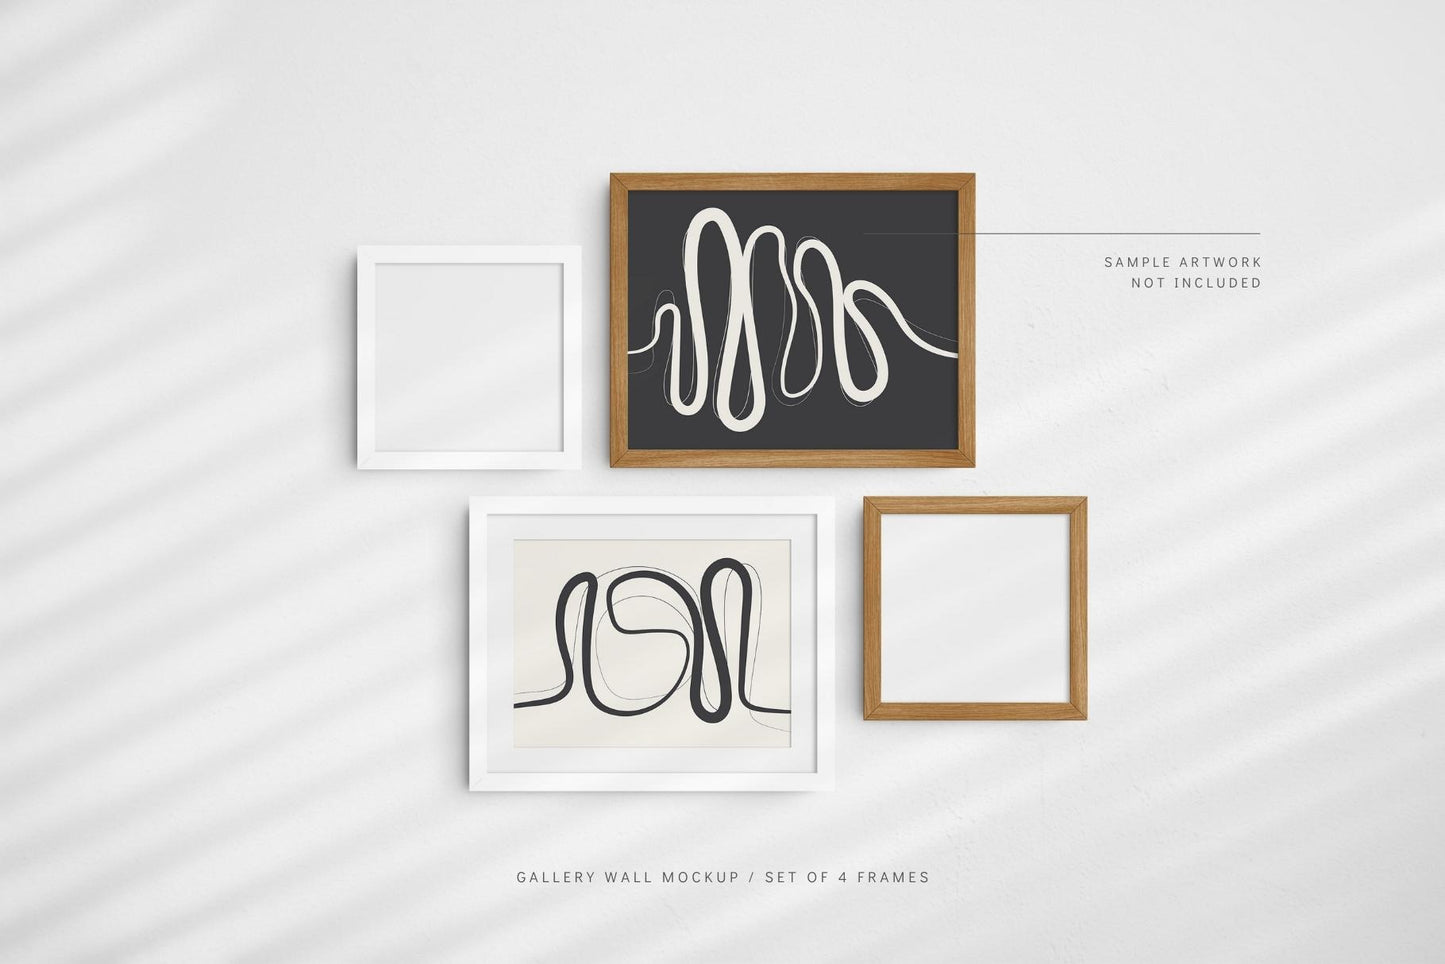 Gallery Wall Mockup | Set of 4 Frames | Frame Mockup | PSD | Editable Frame Colors and Texture